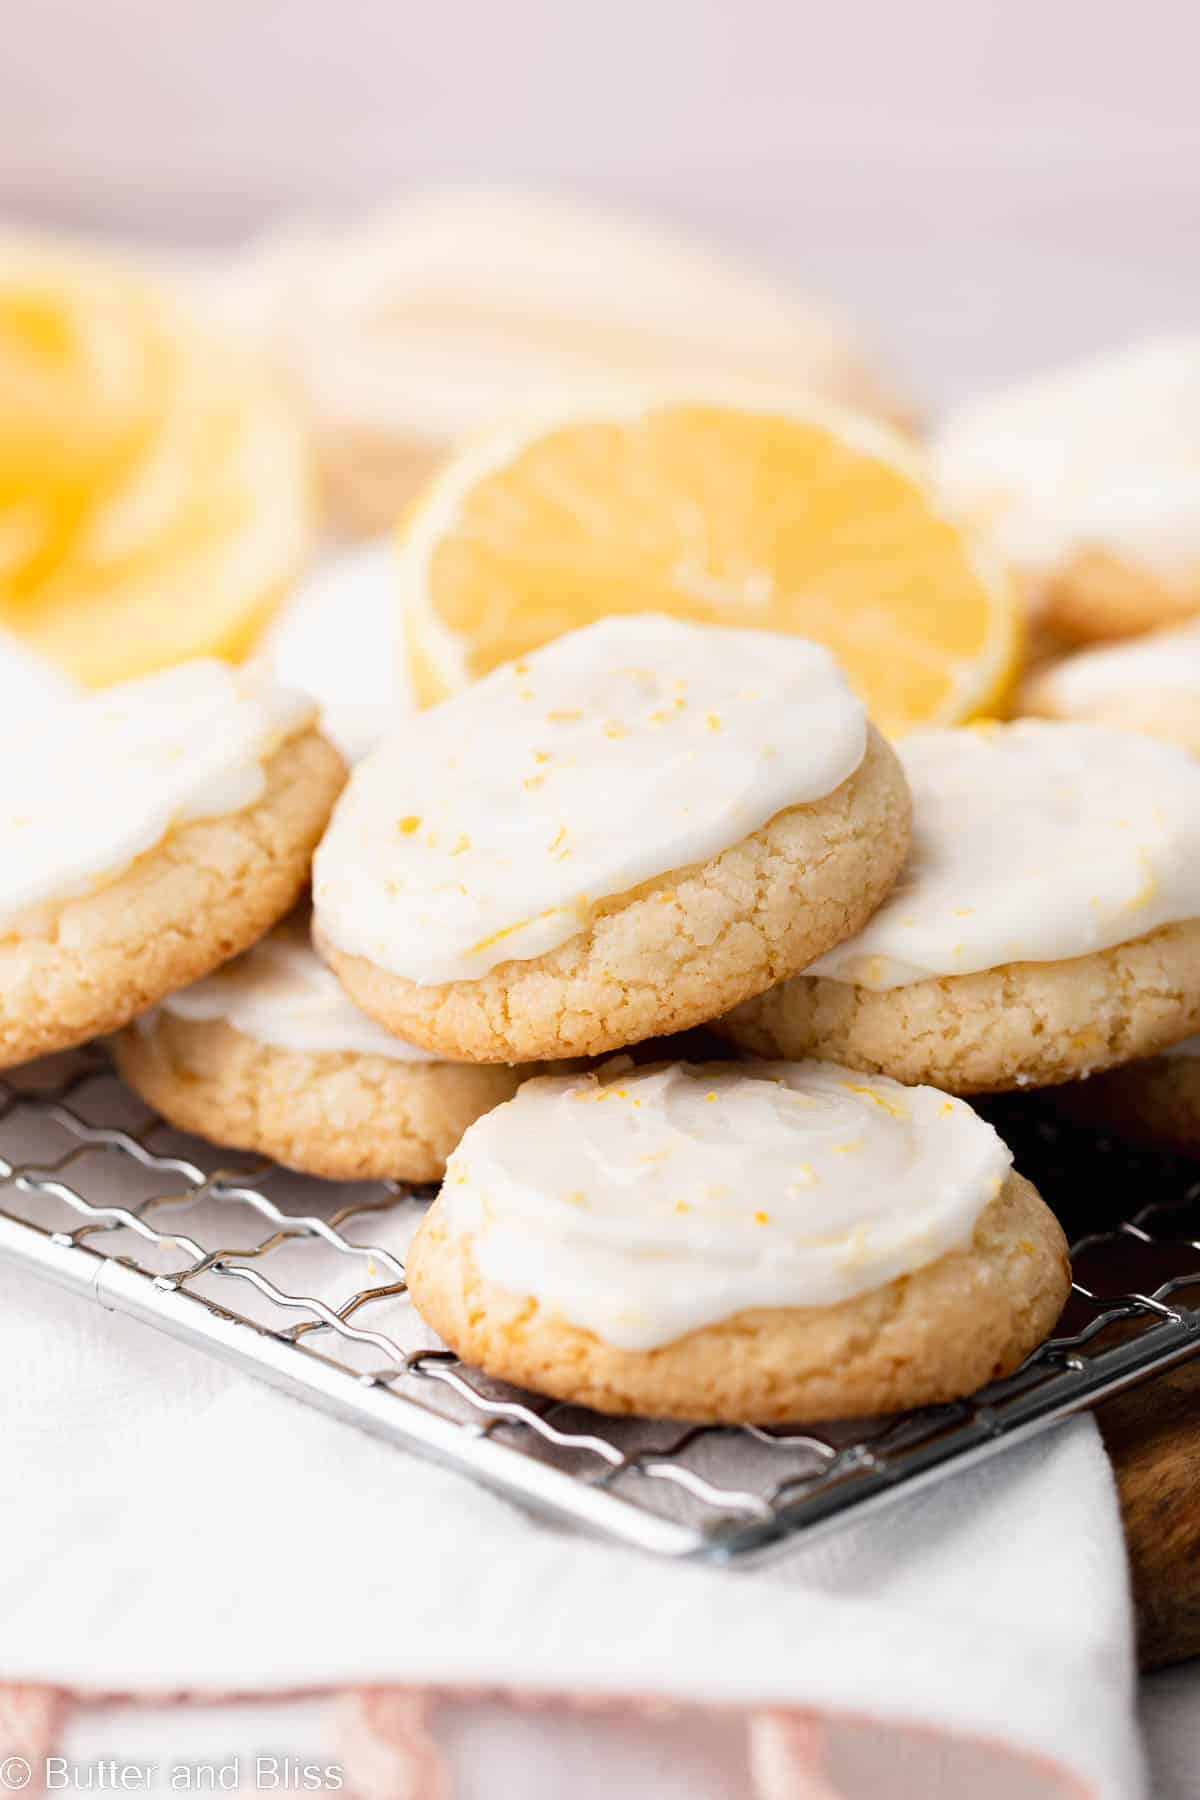 Close up of a glazed gluten free lemon drop shortbread cookie on a wire cooling rack.